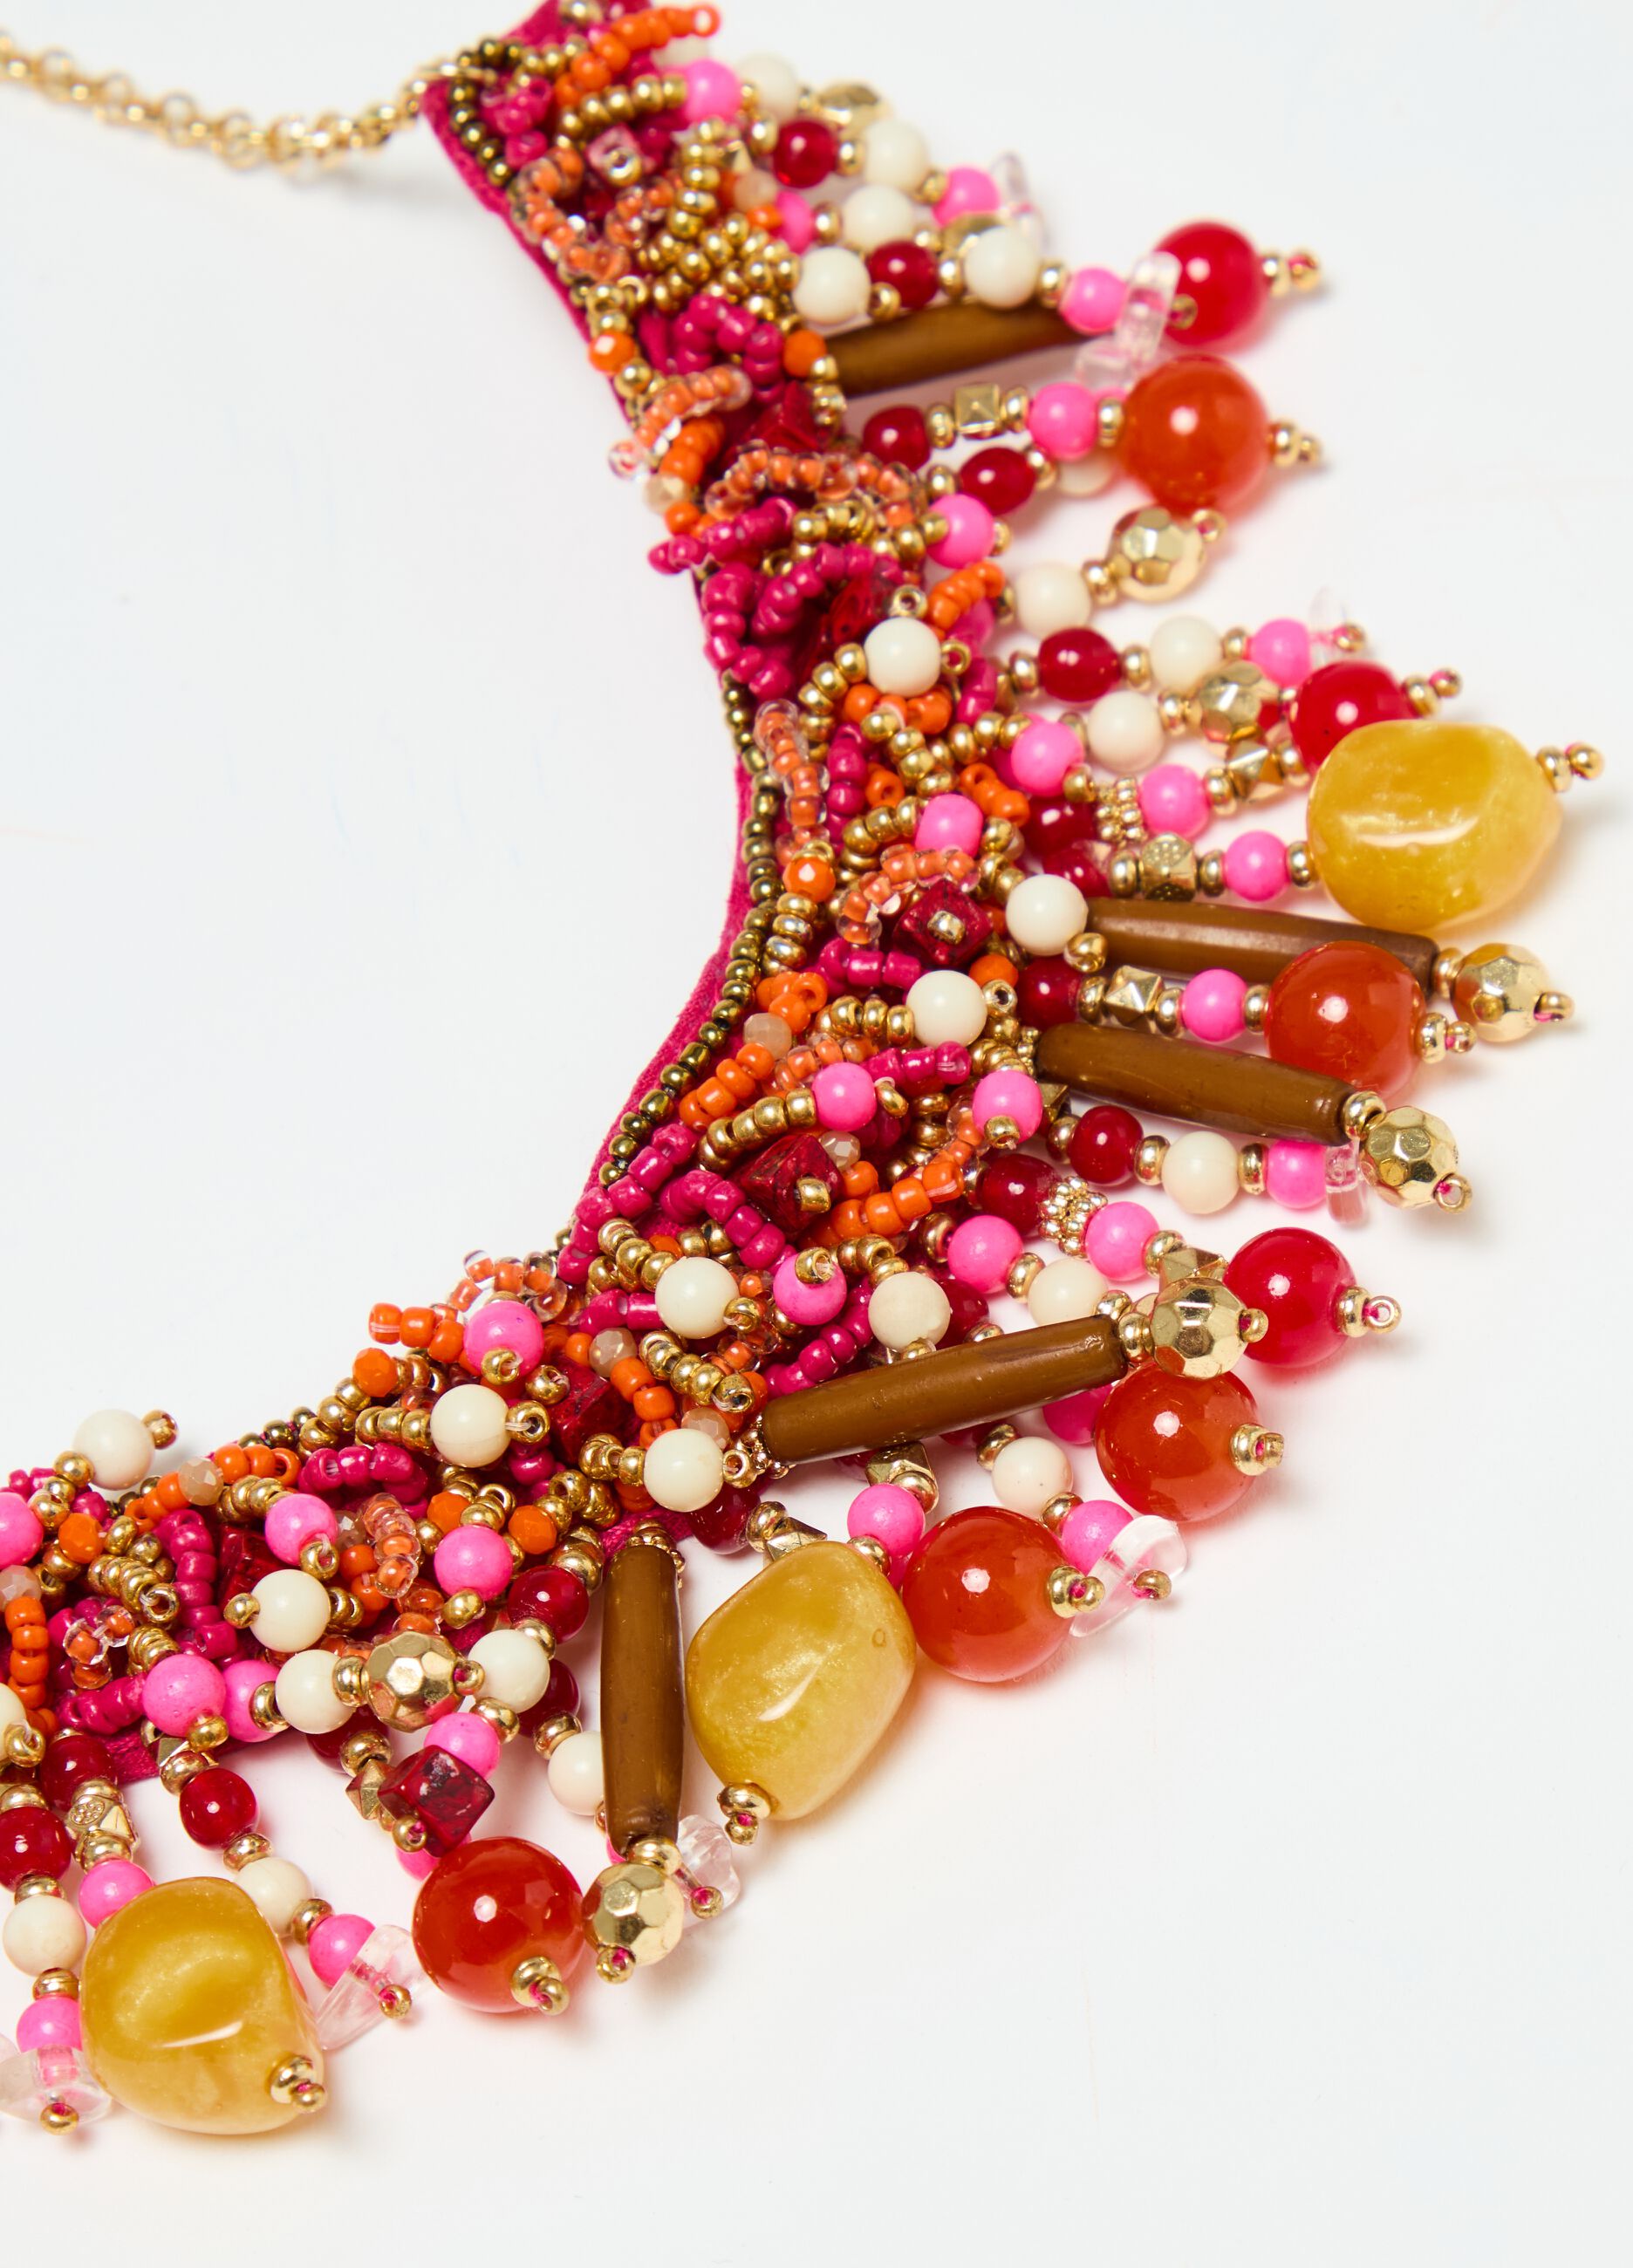 Positano summer necklaces with fringing with beads